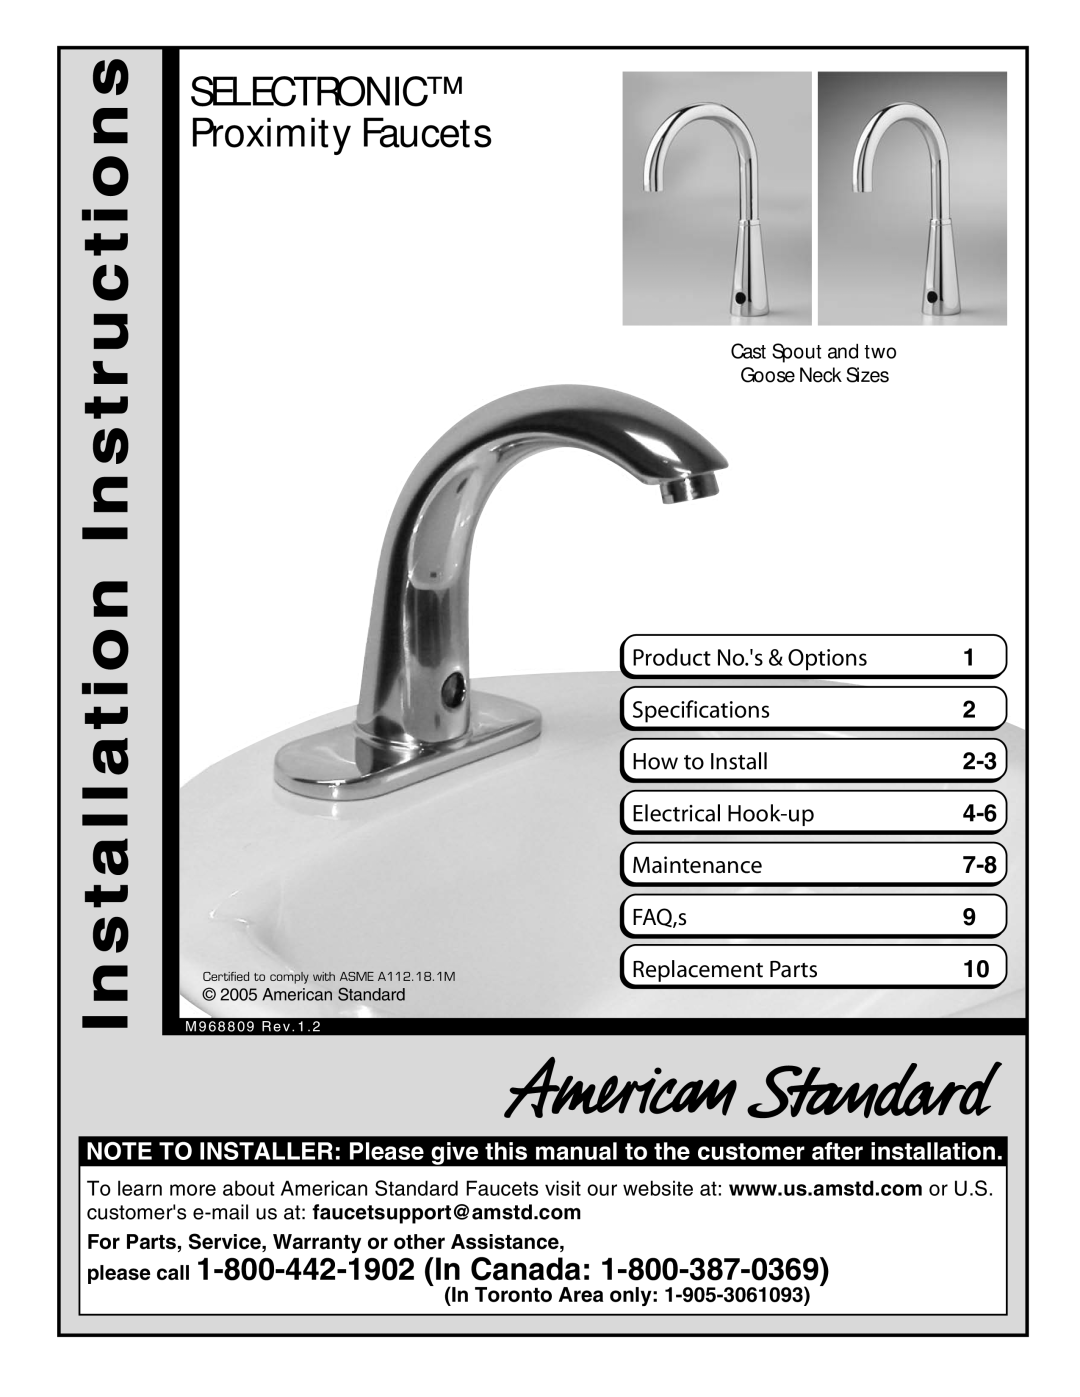 American Standard installation instructions SELECTRONIC Proximity Faucets 